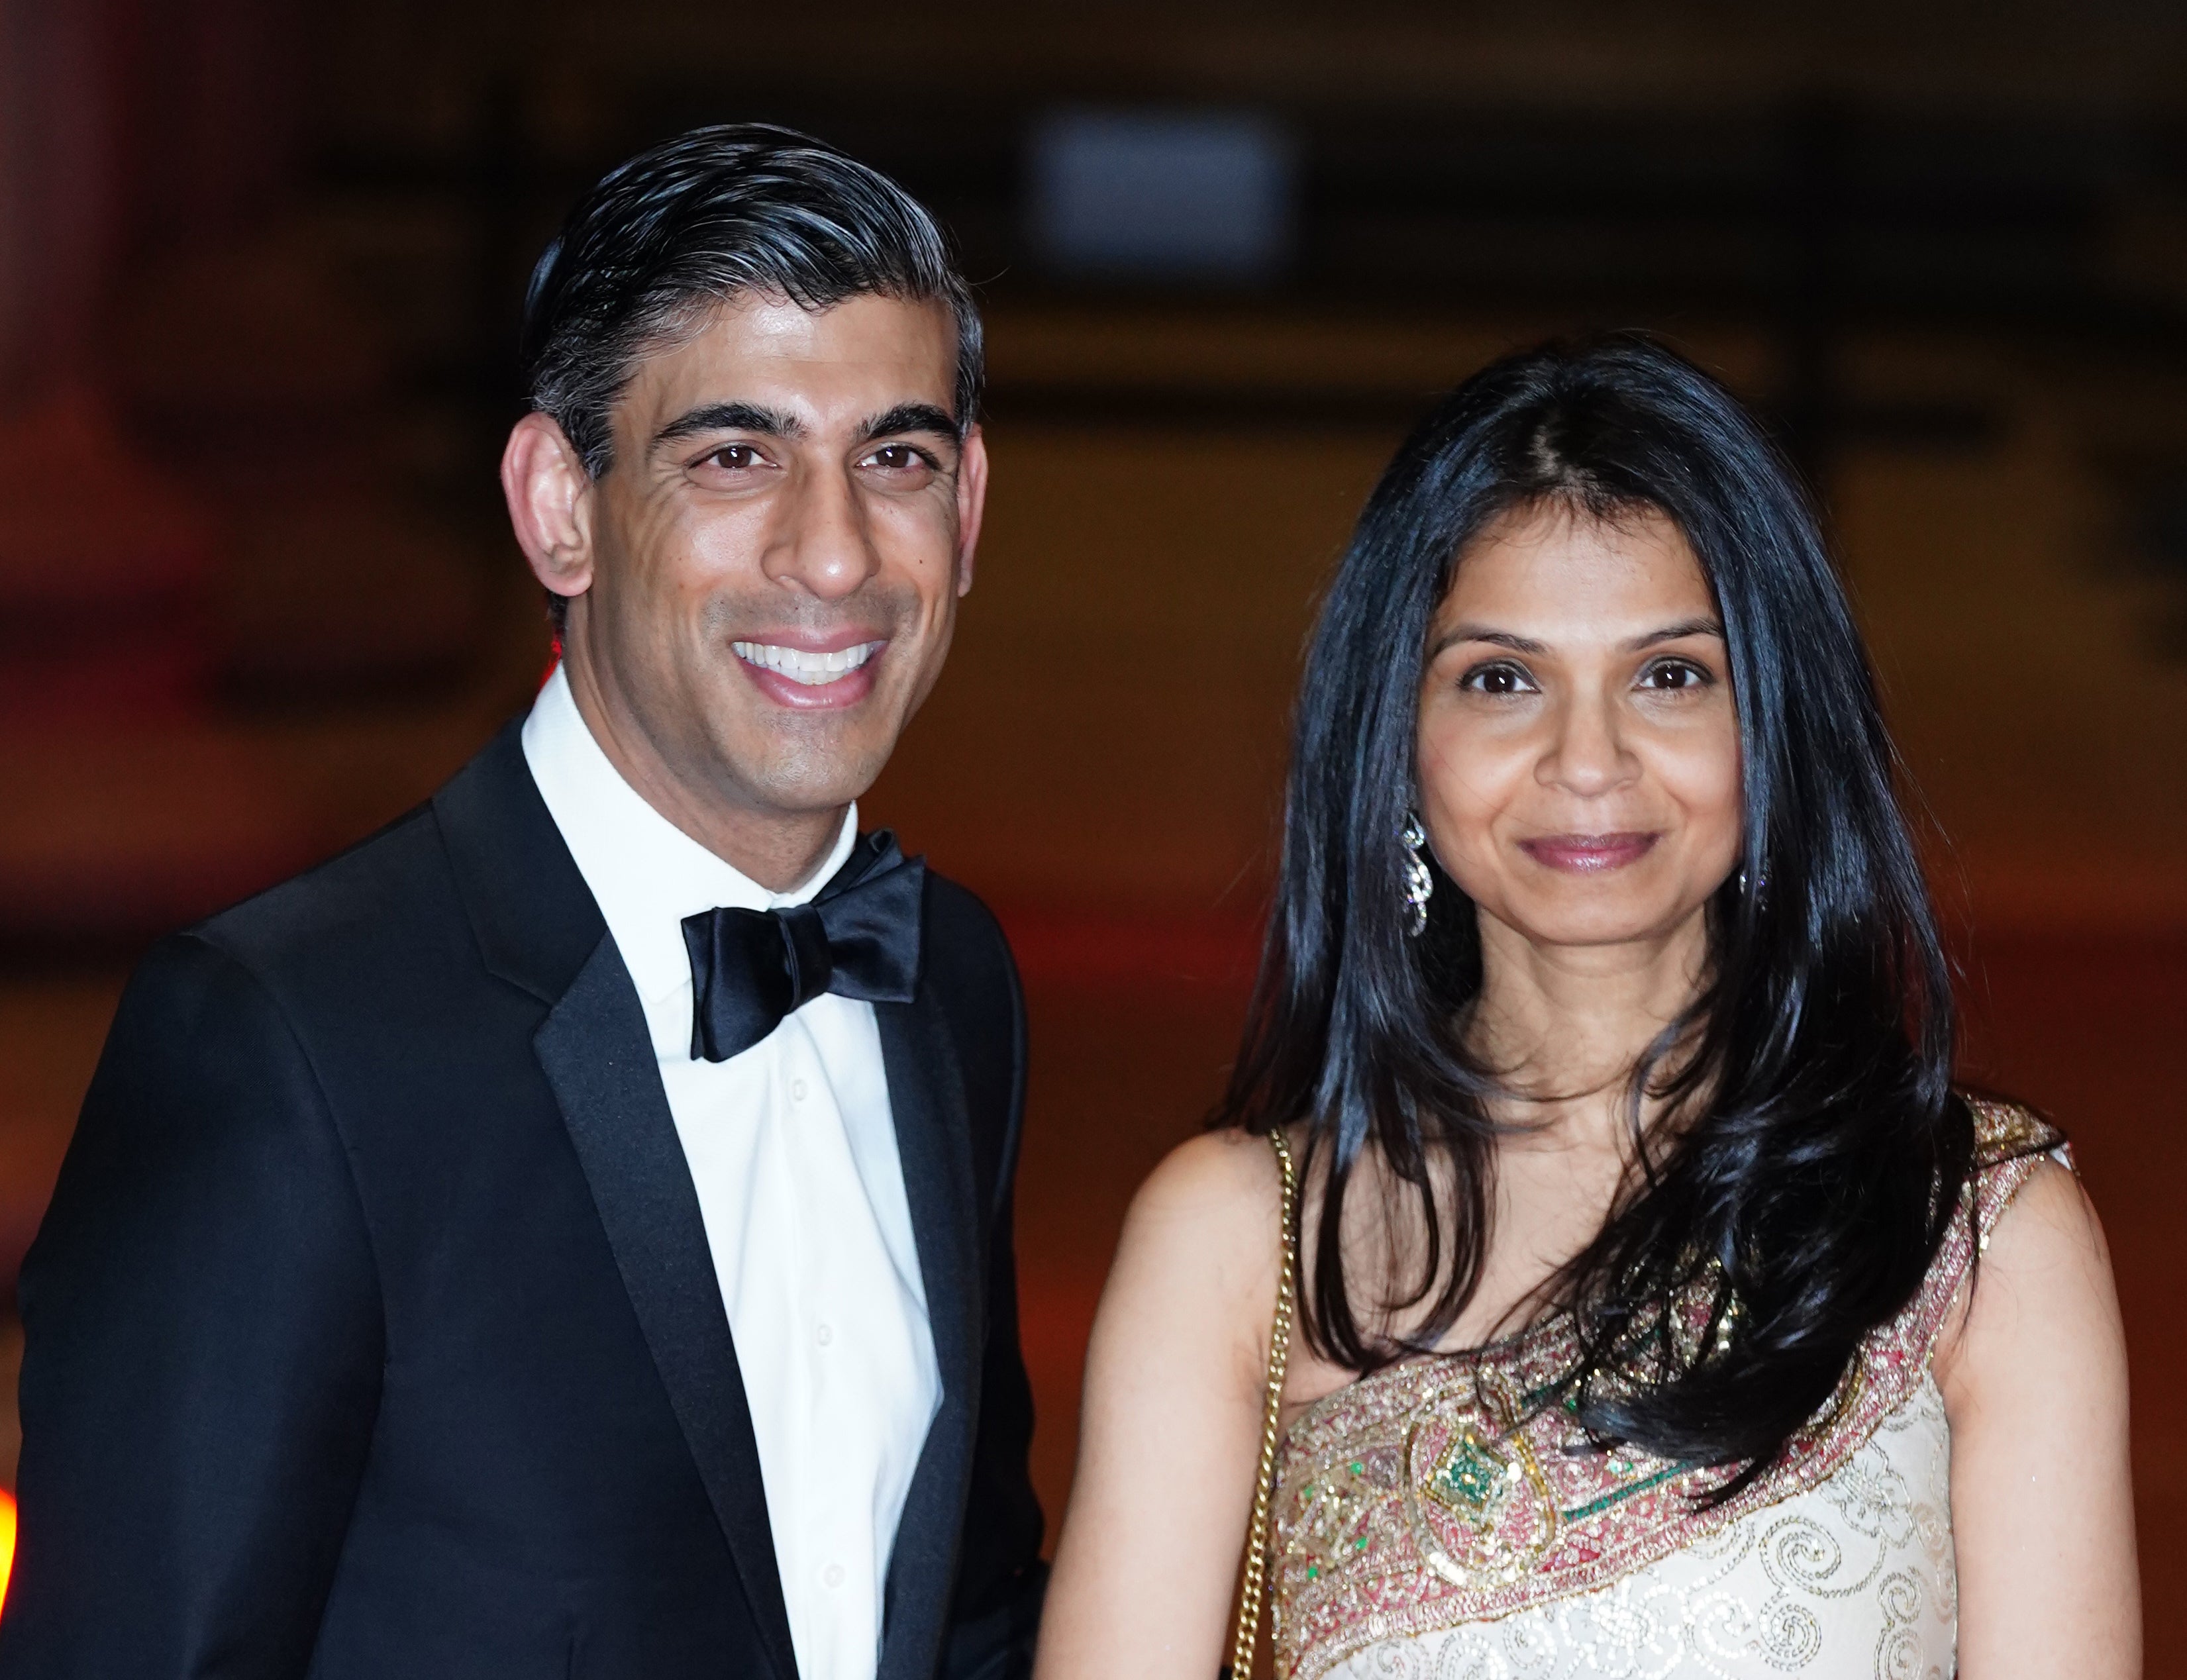 Rishi Sunak came under fire from voters over his wife Akshata Murty’s non-dom status